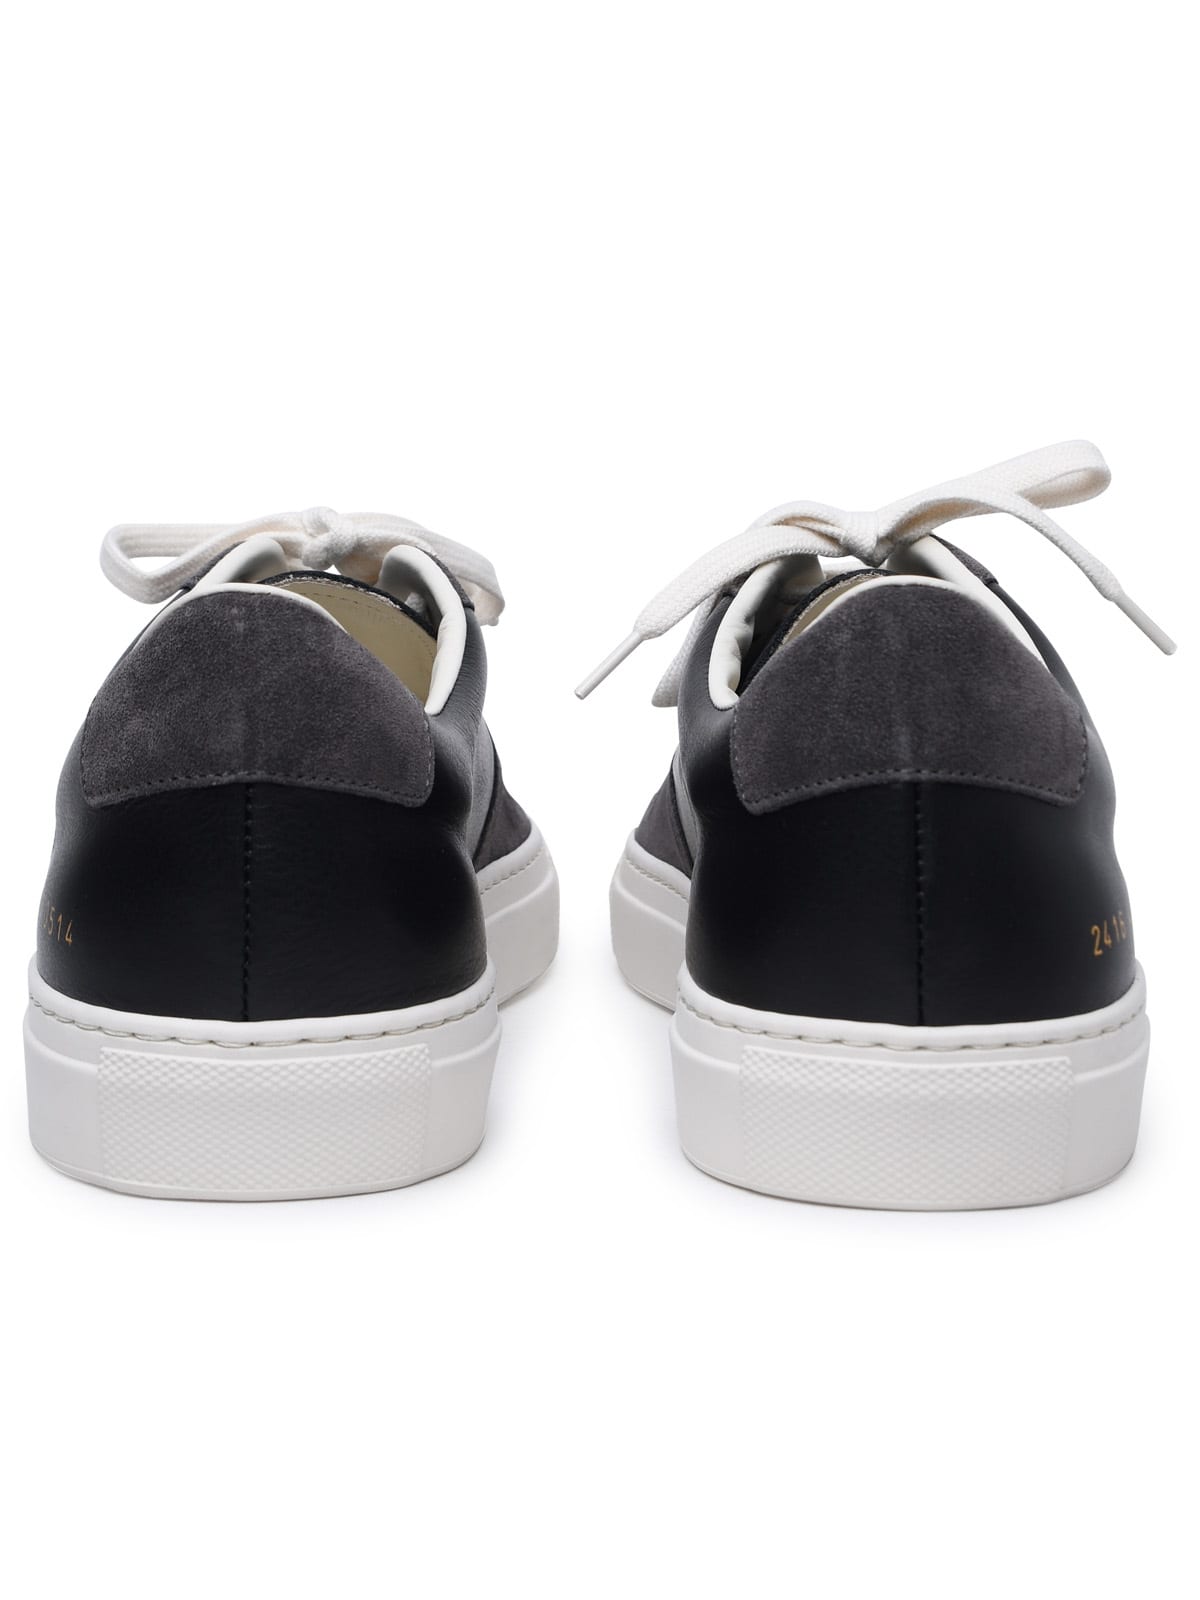 Shop Common Projects Bball Duo Black Leather Sneakers